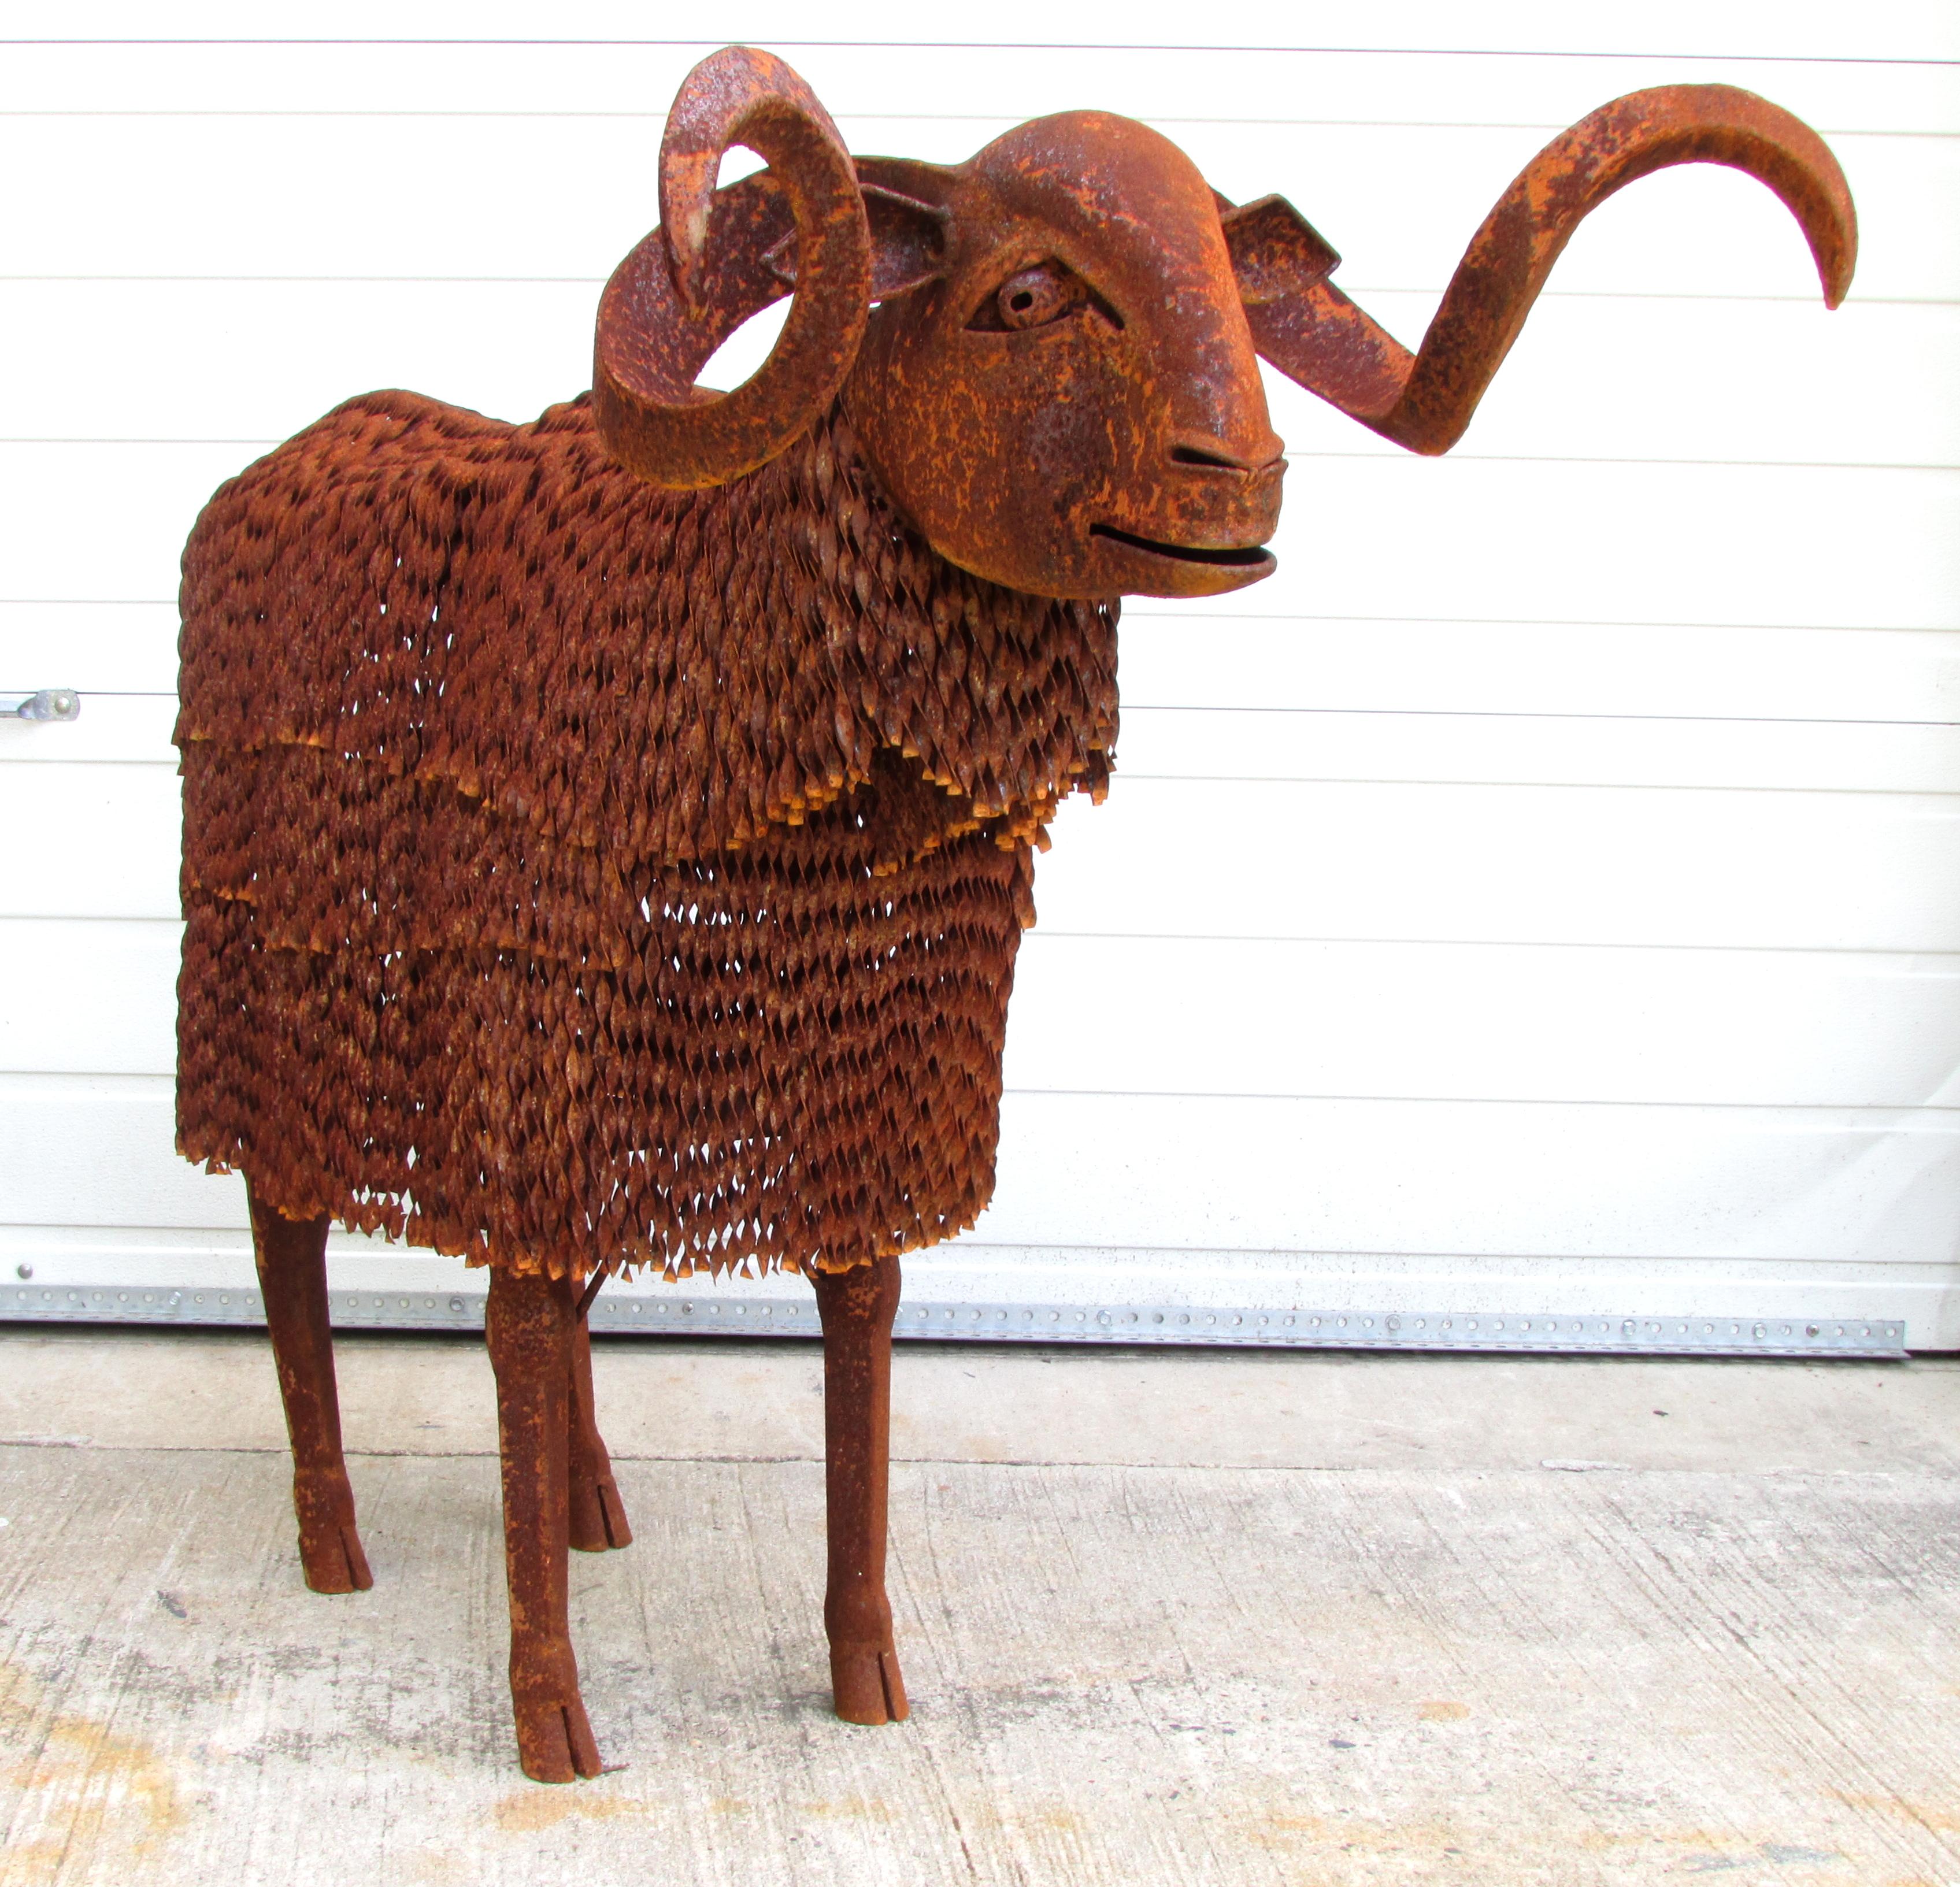 Indian Rusty Lifesize Sheep For Sale